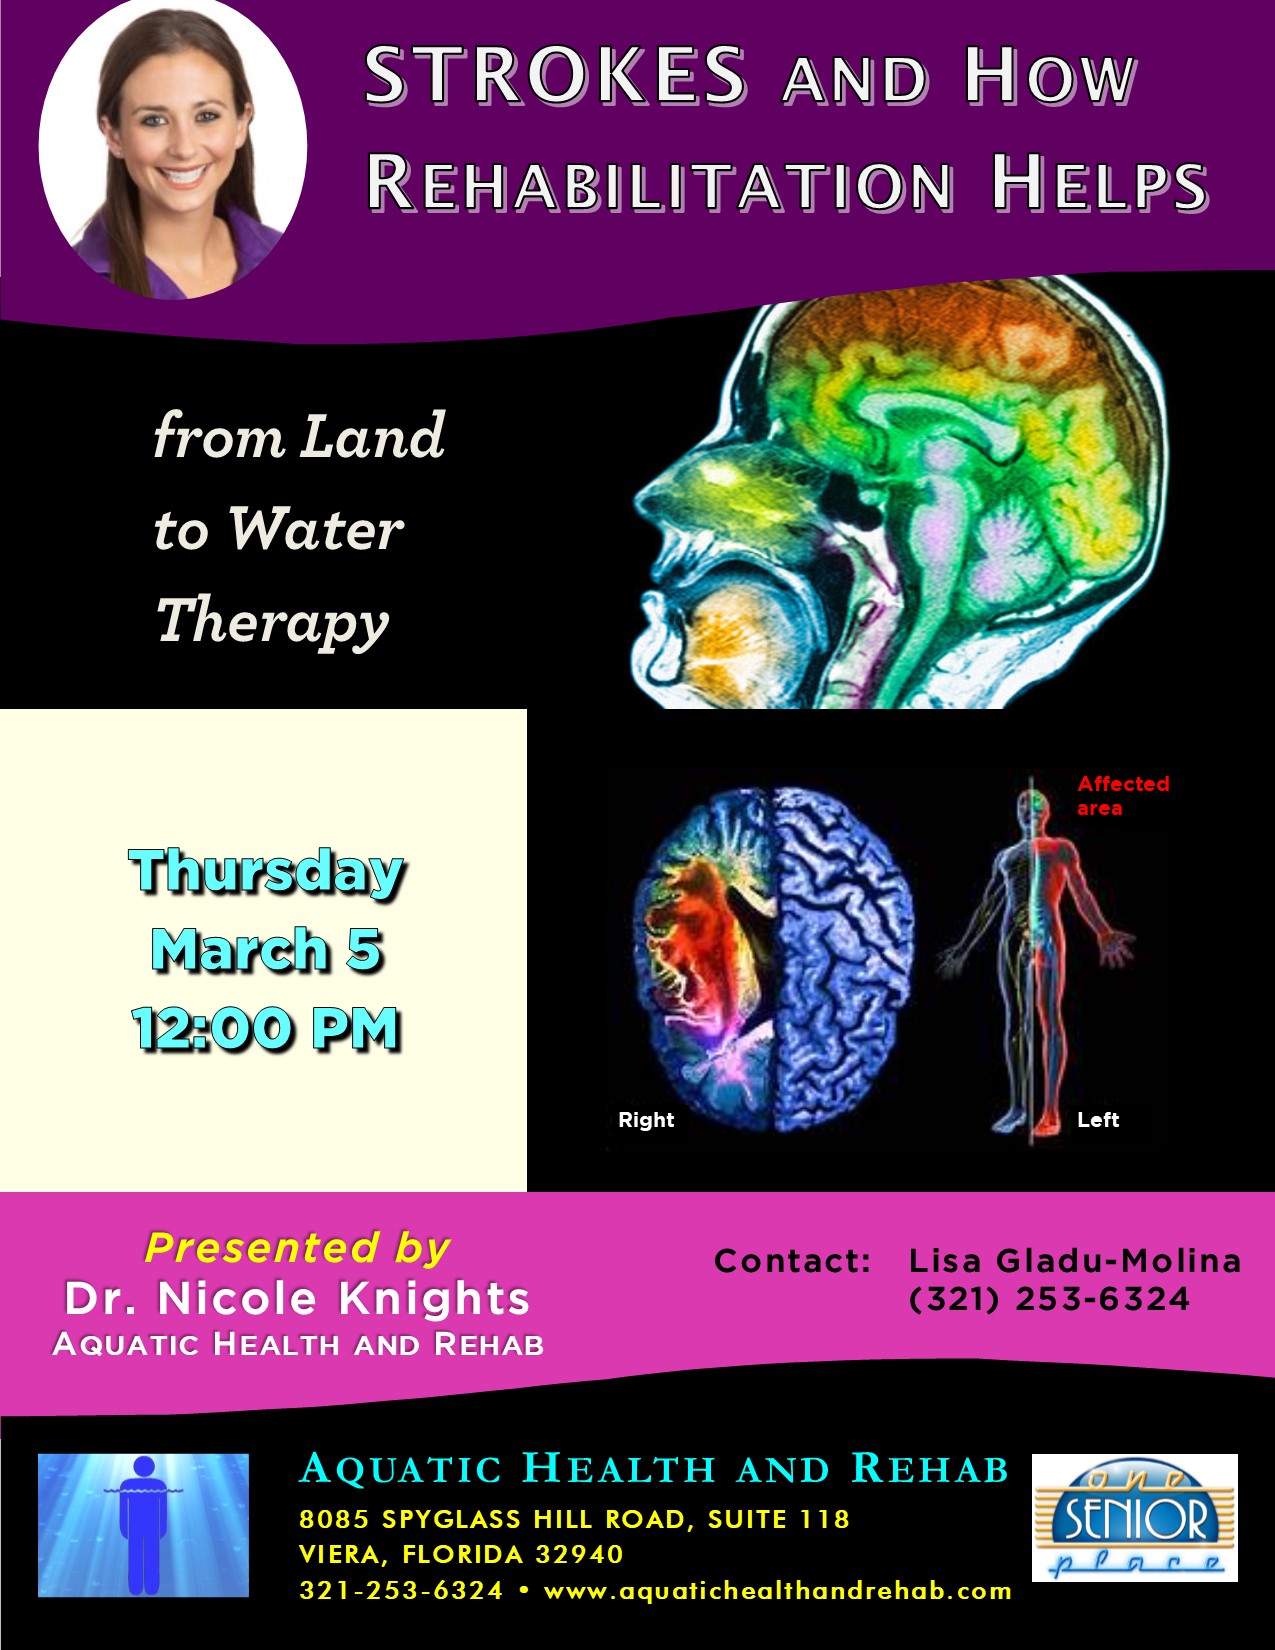 STROKES and How Rehabilitation Helps presented by Dr. Nicole Knights with Aquatic Health and Rehab